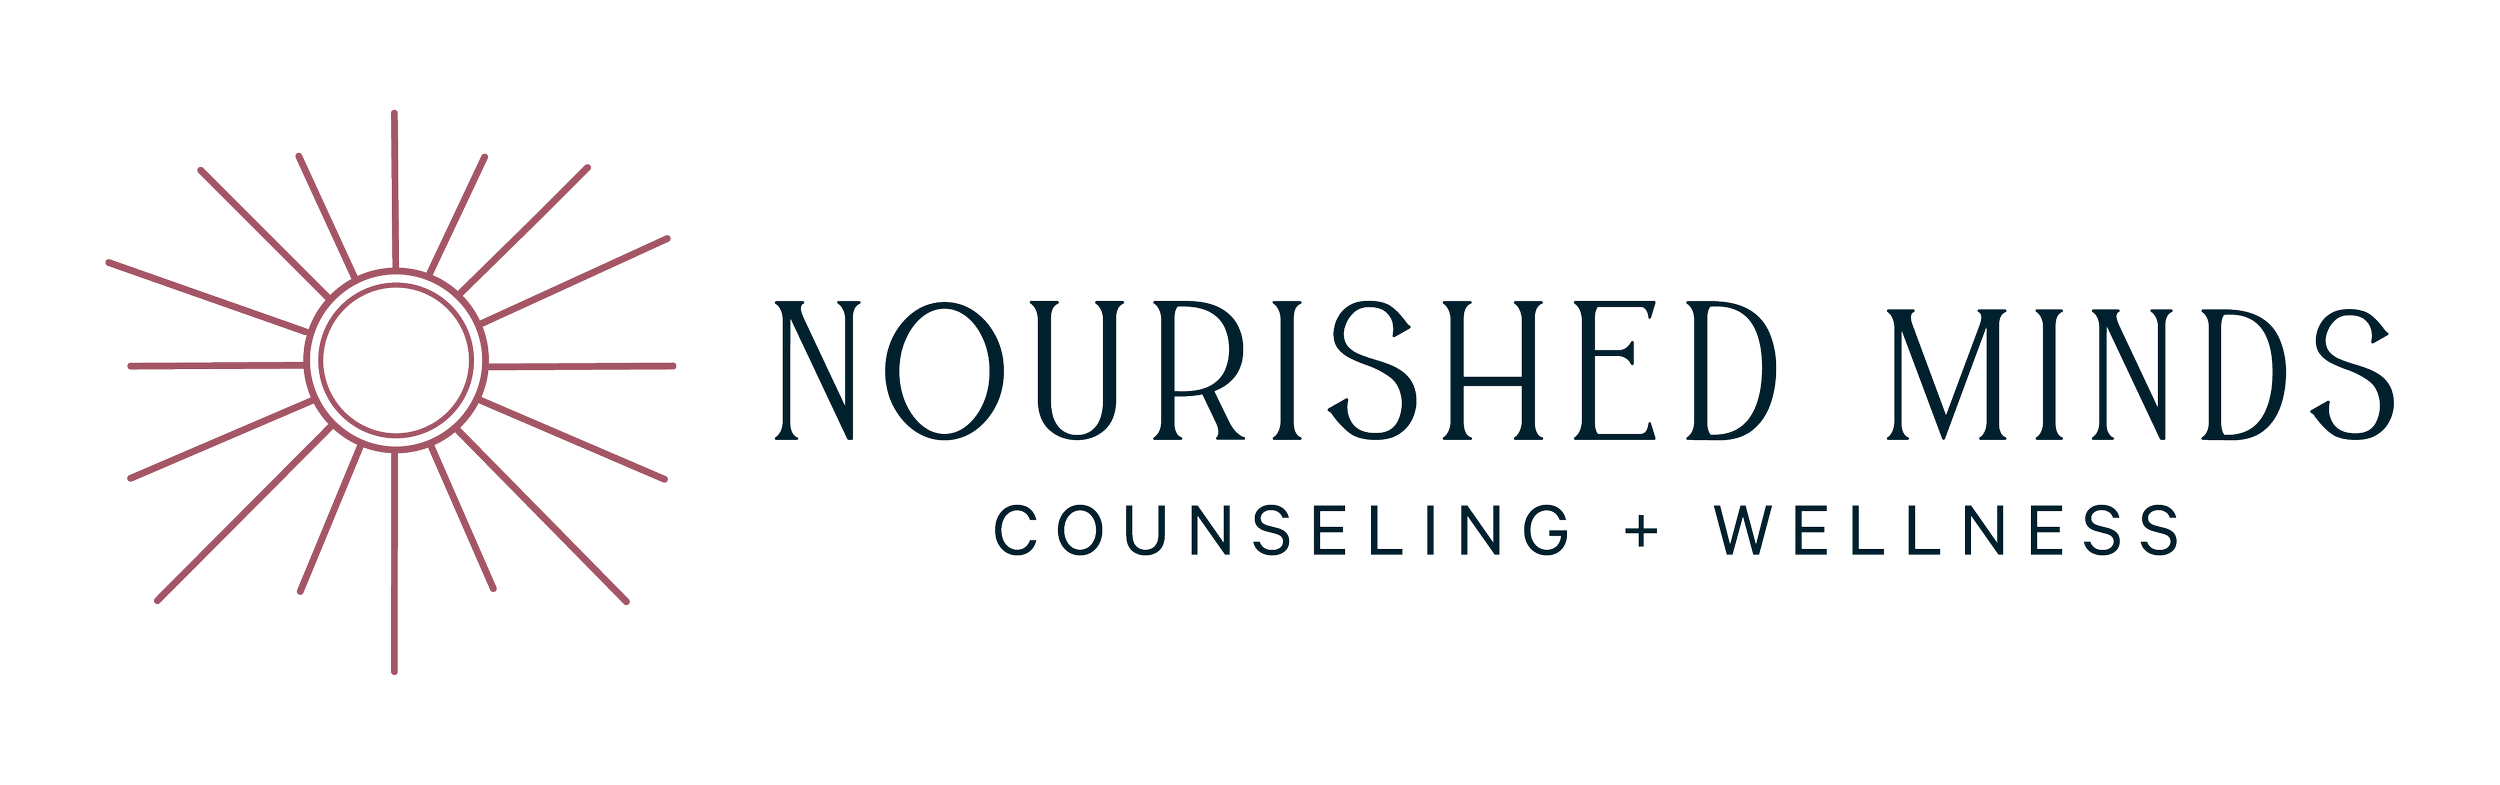 Nourished Minds: Counseling + Wellness